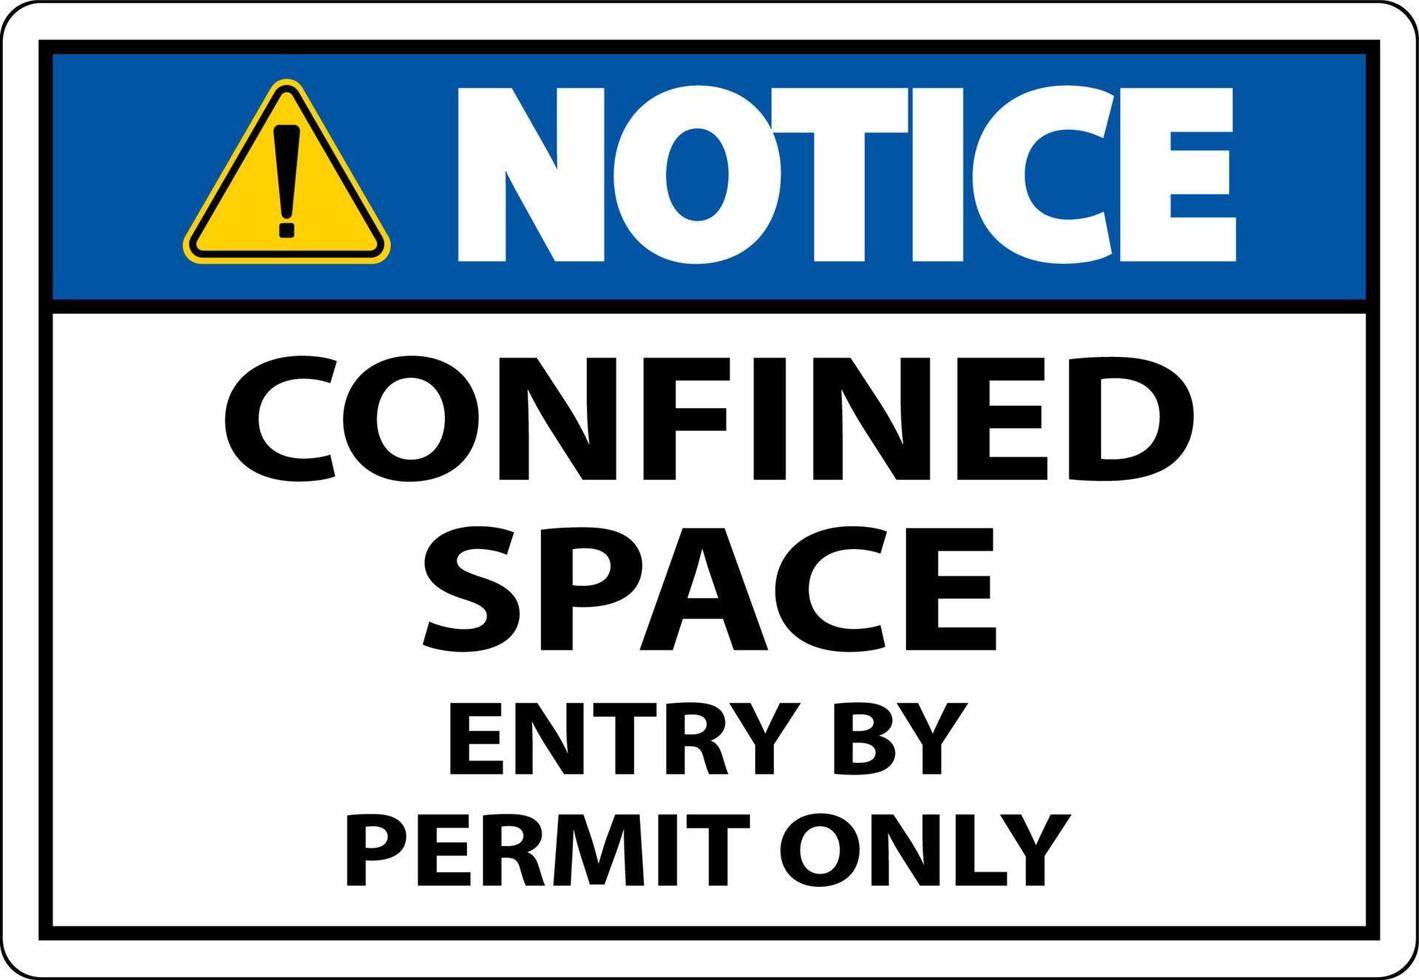 Notice Confined Space Entry By Permit Only Sign vector